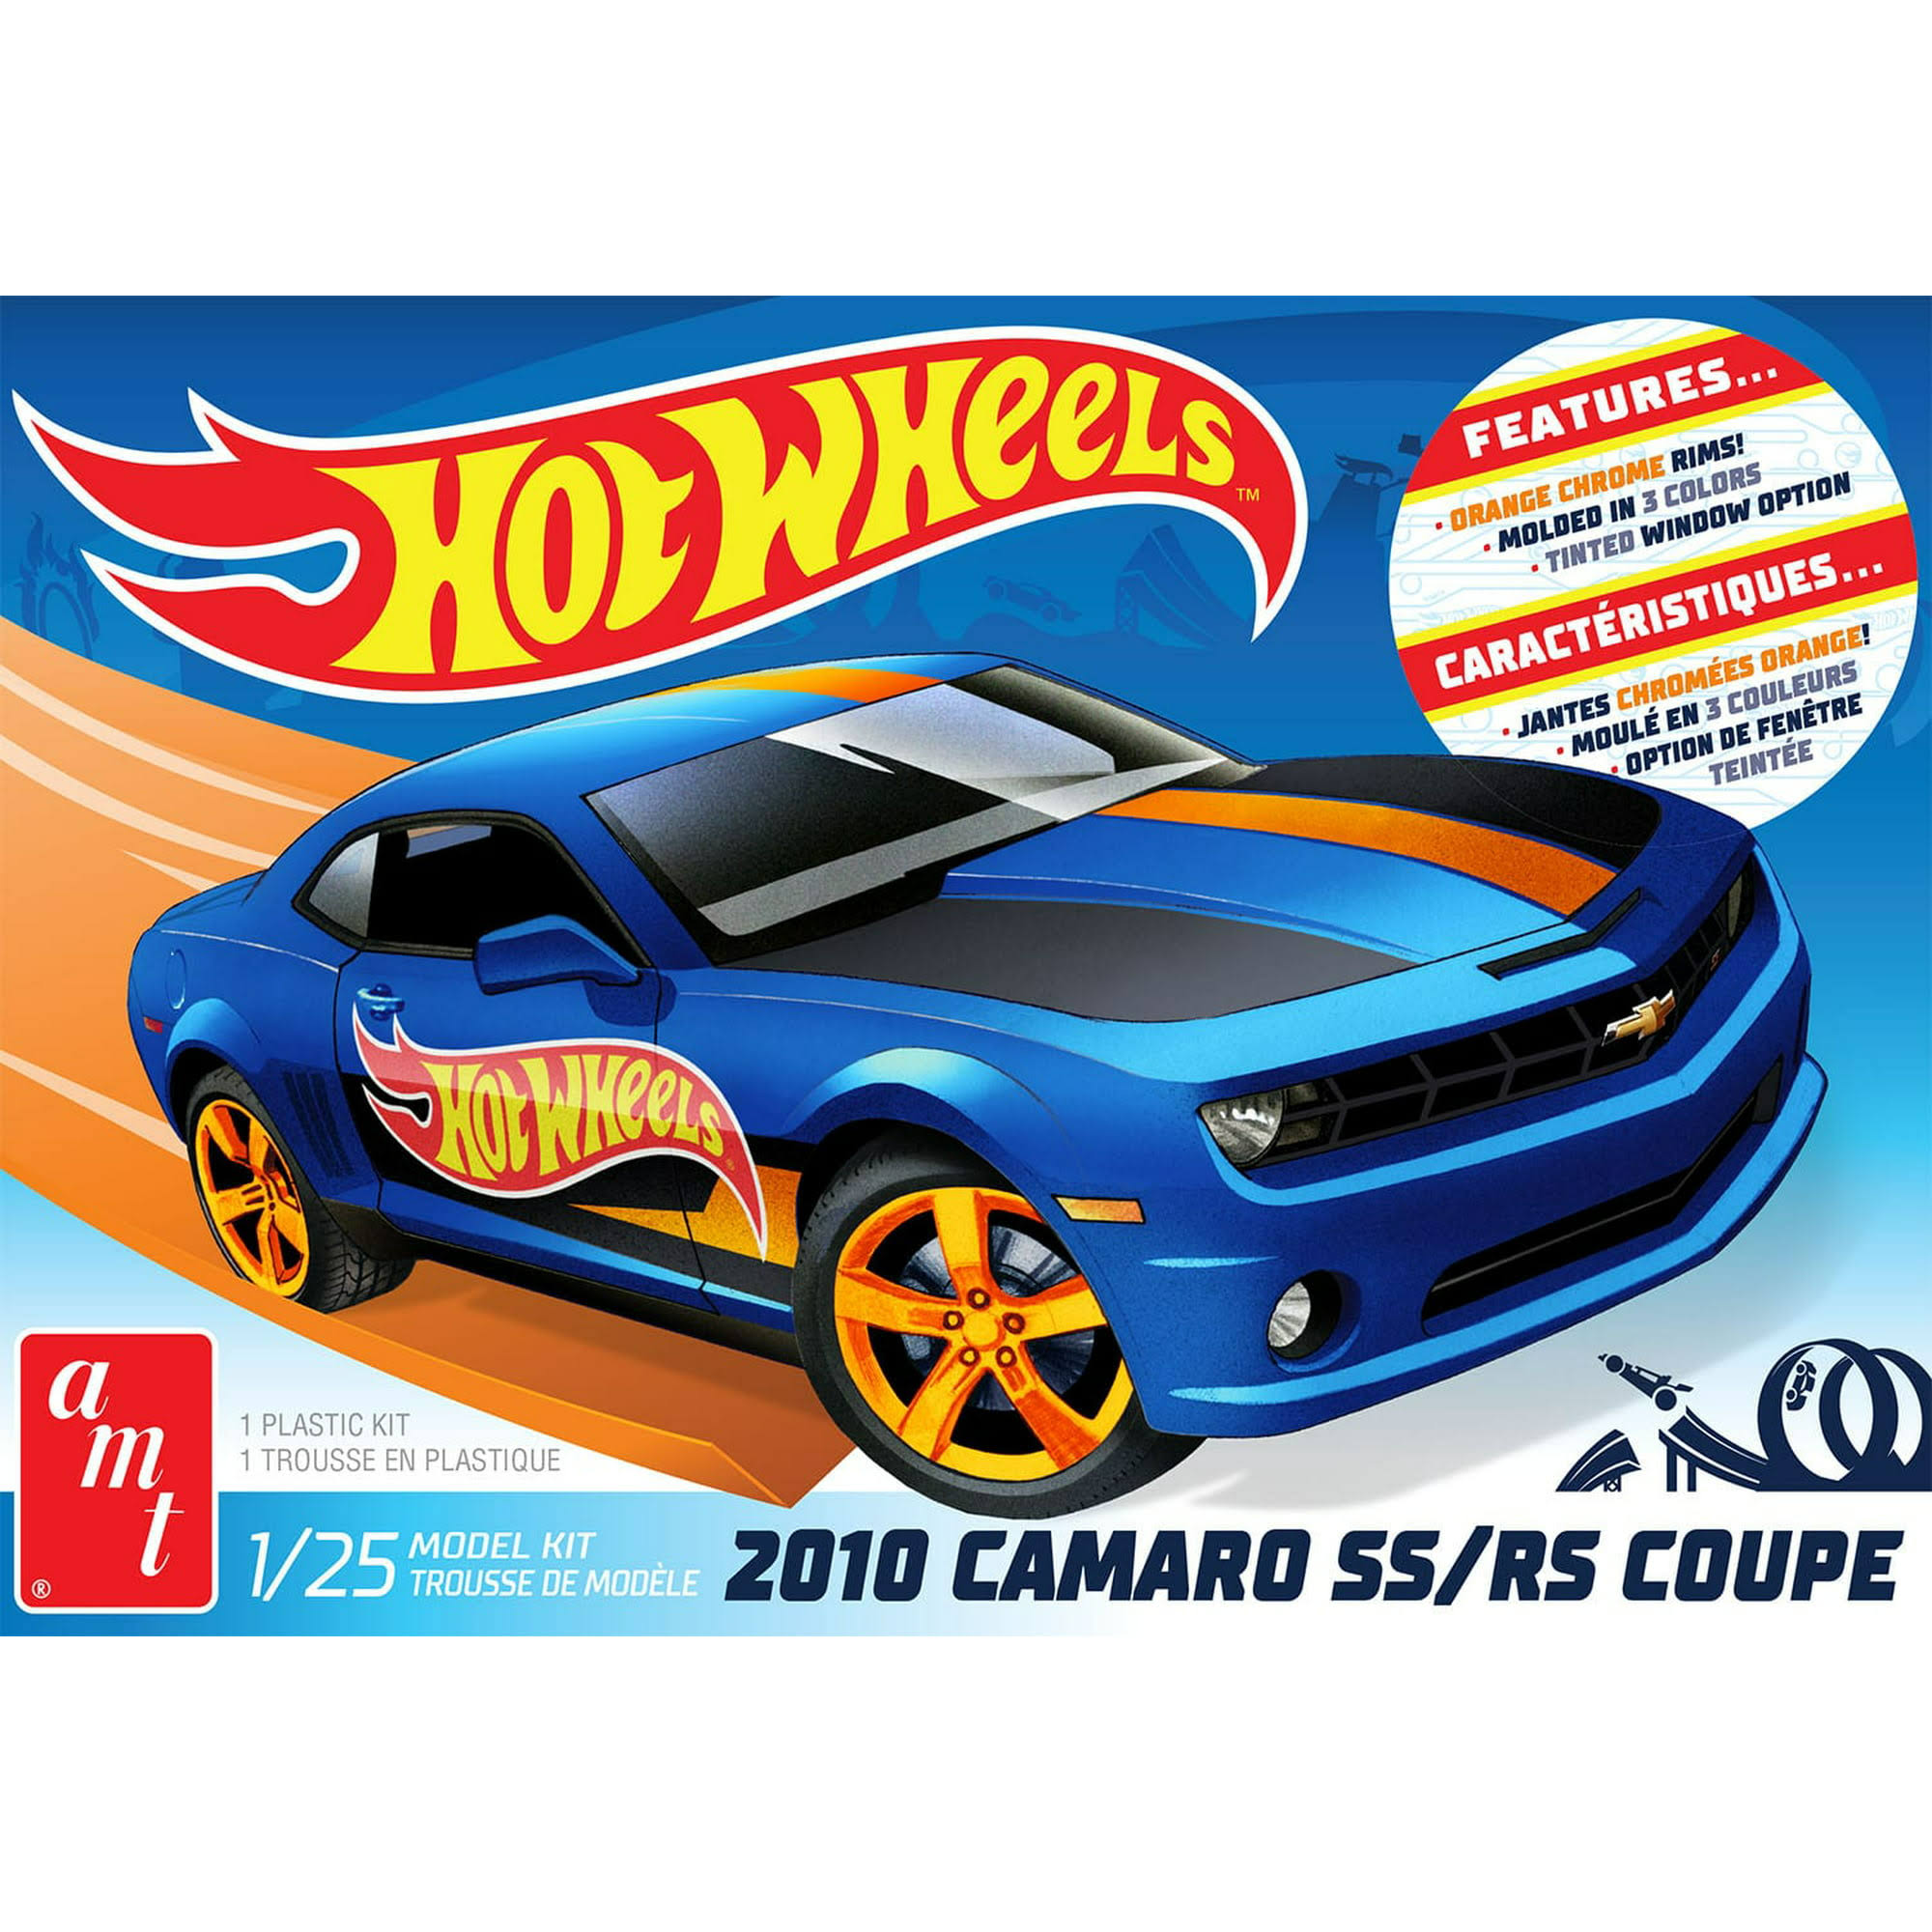 AMT 2010 Camaro SS/RS Coupe Hot Wheels Model | 1/25 Scale | 1255